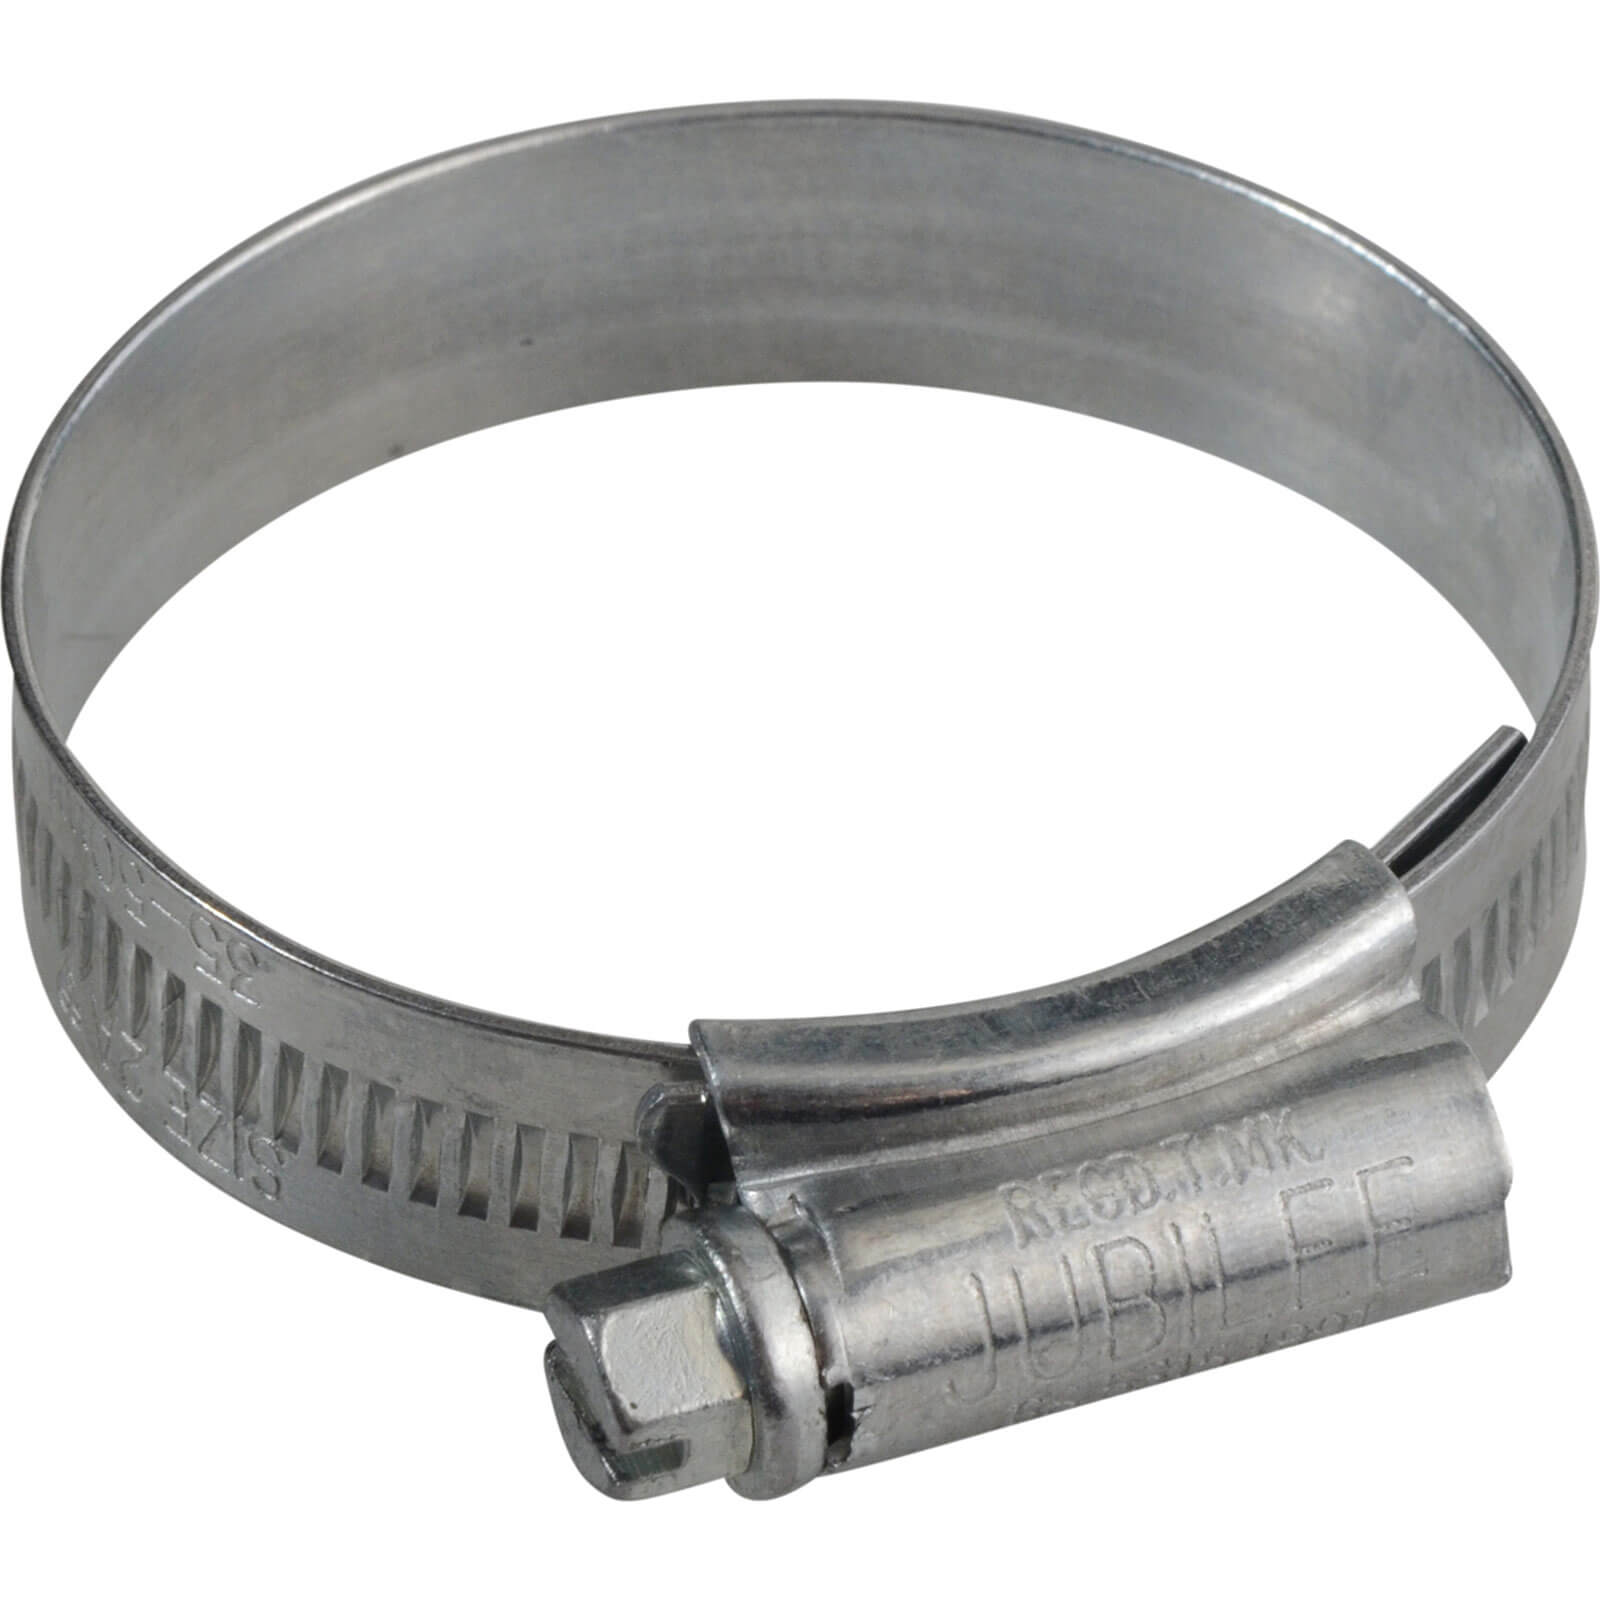 Photos - Nail / Screw / Fastener Jubilee Zinc Plated Hose Clip 35mm - 50mm Pack of 1 2AMS 